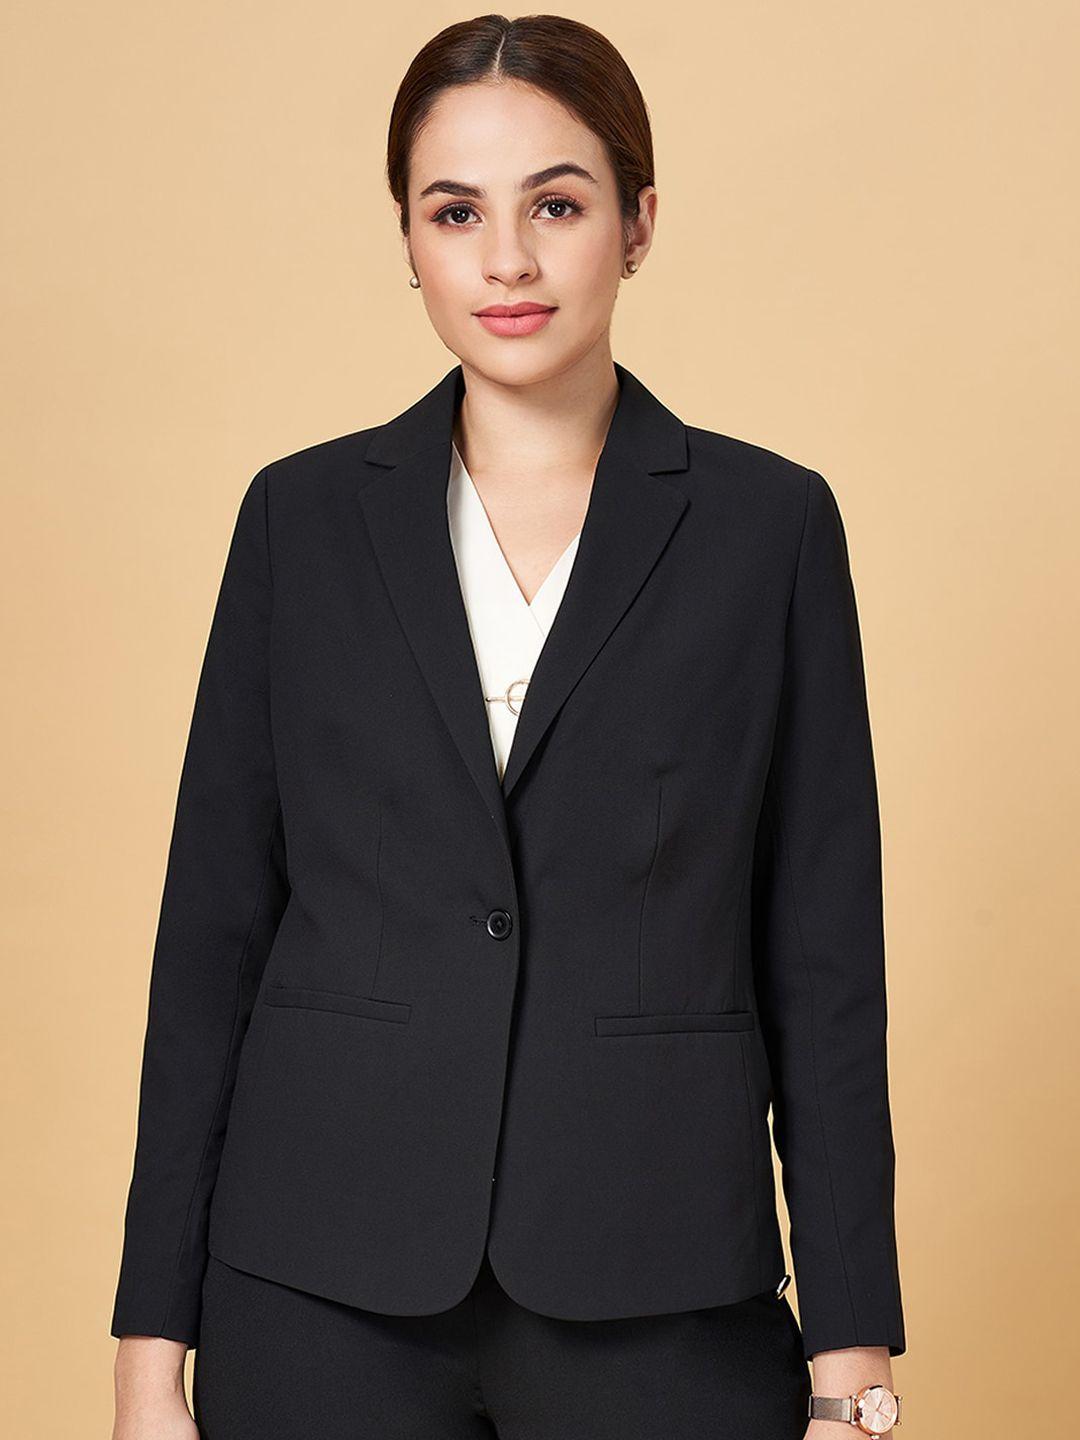 annabelle by pantaloons notched lapel collar single-breasted formal blazer